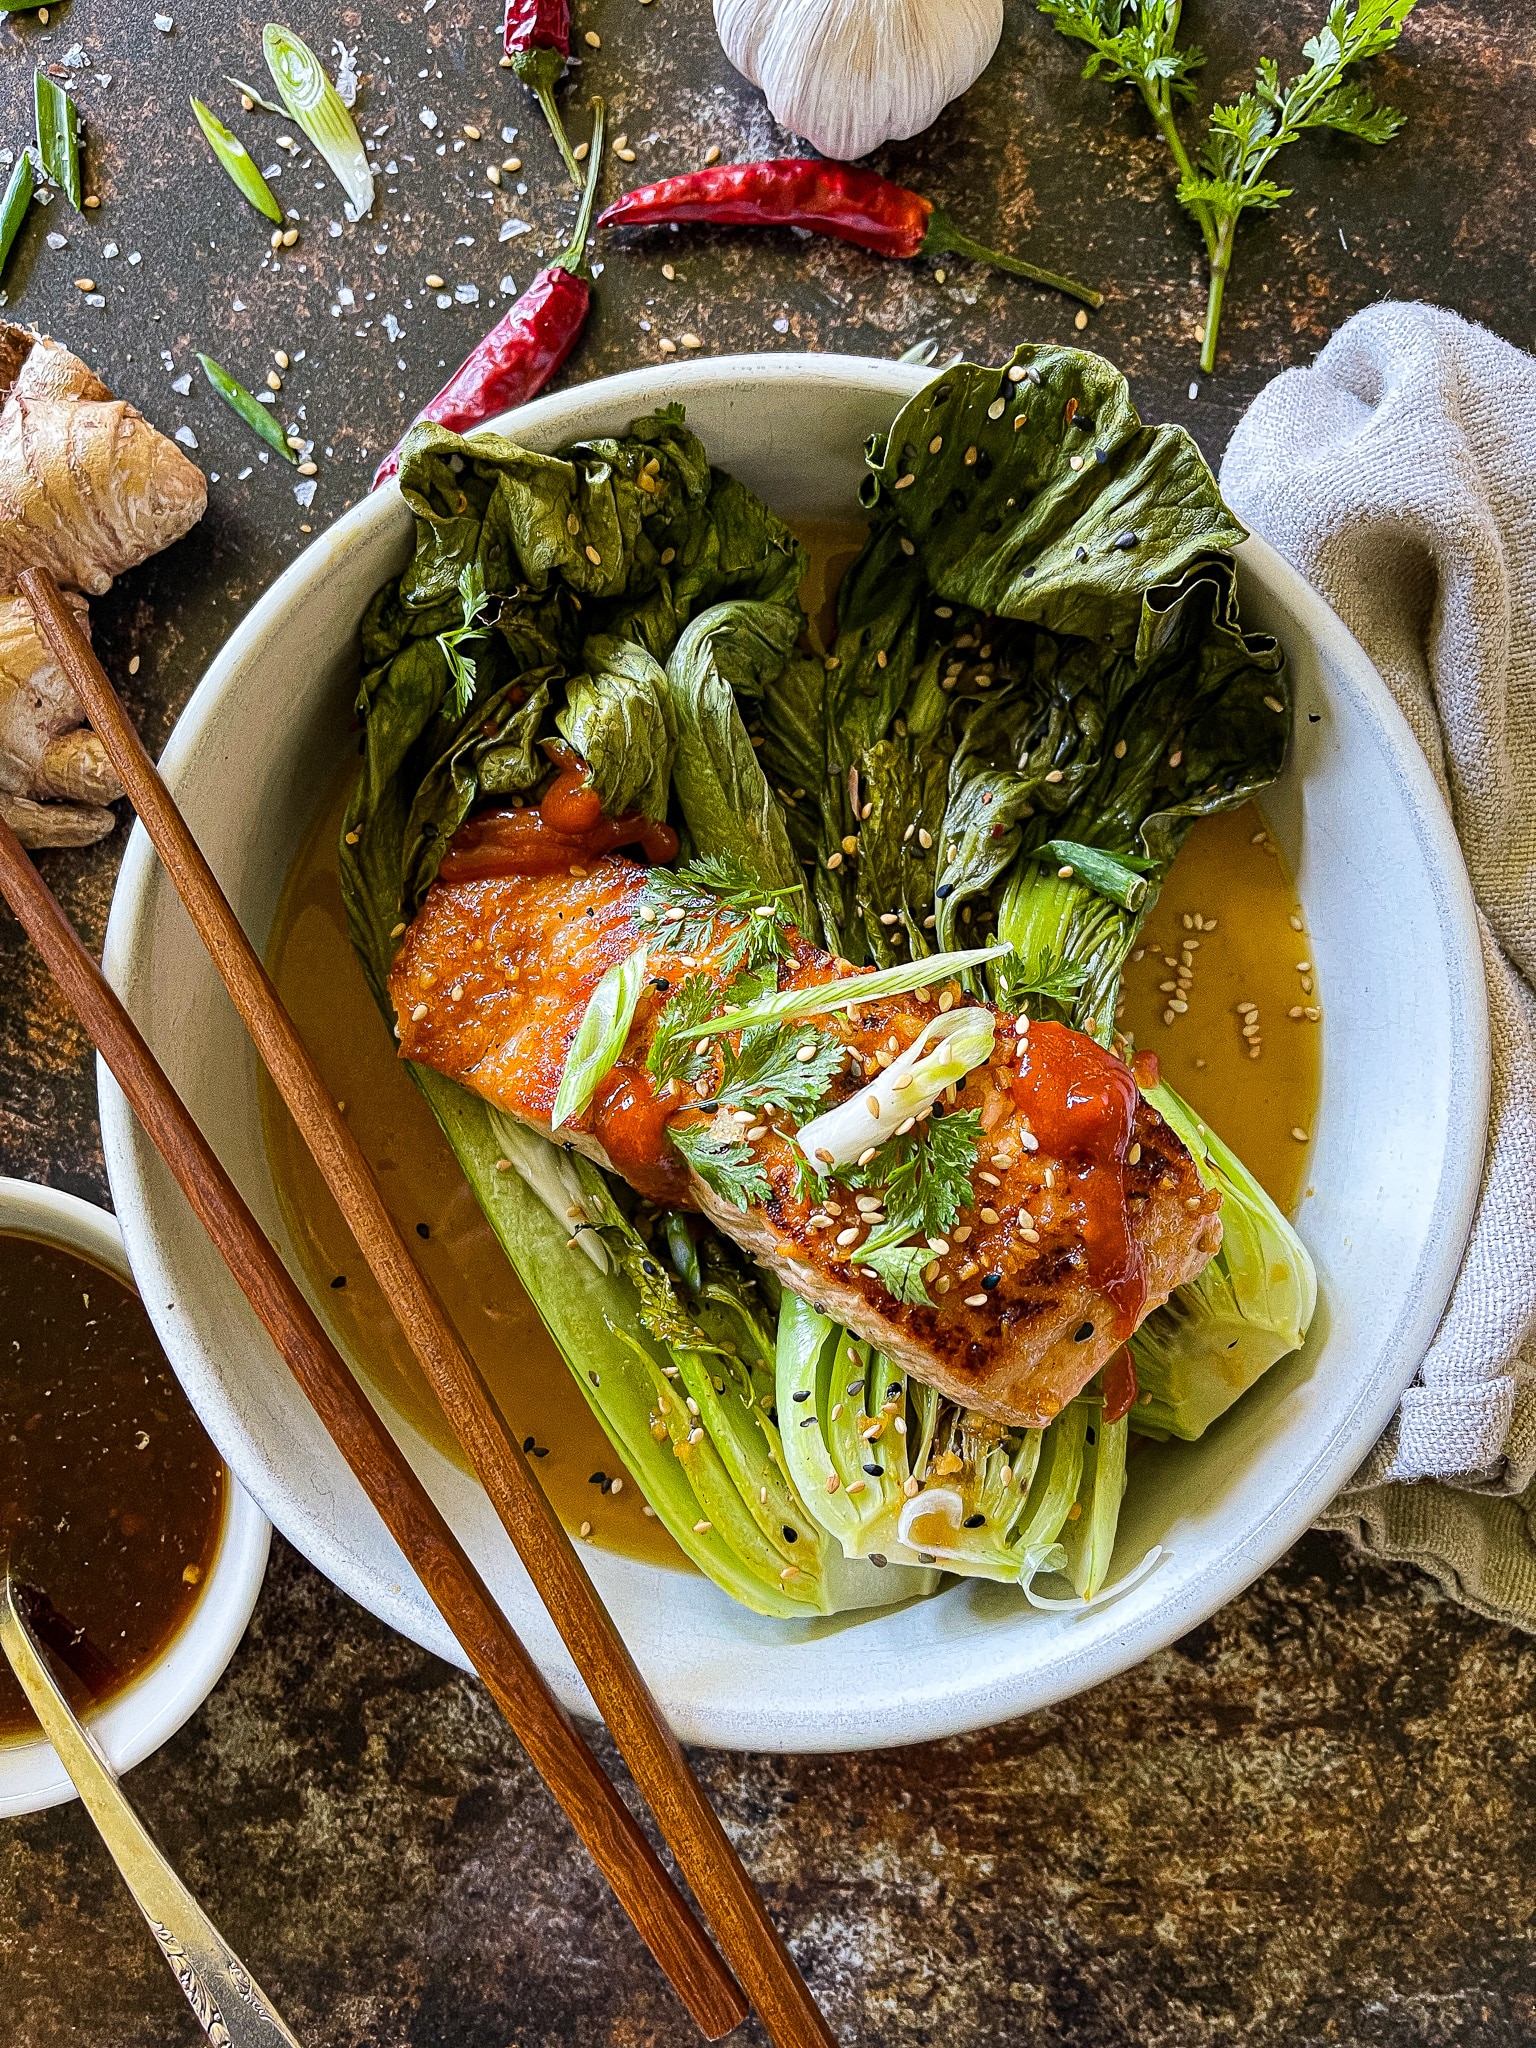 soy ginger salmon served with roasted bok choy, garnished with cilantro, green onion, and sesame seeds